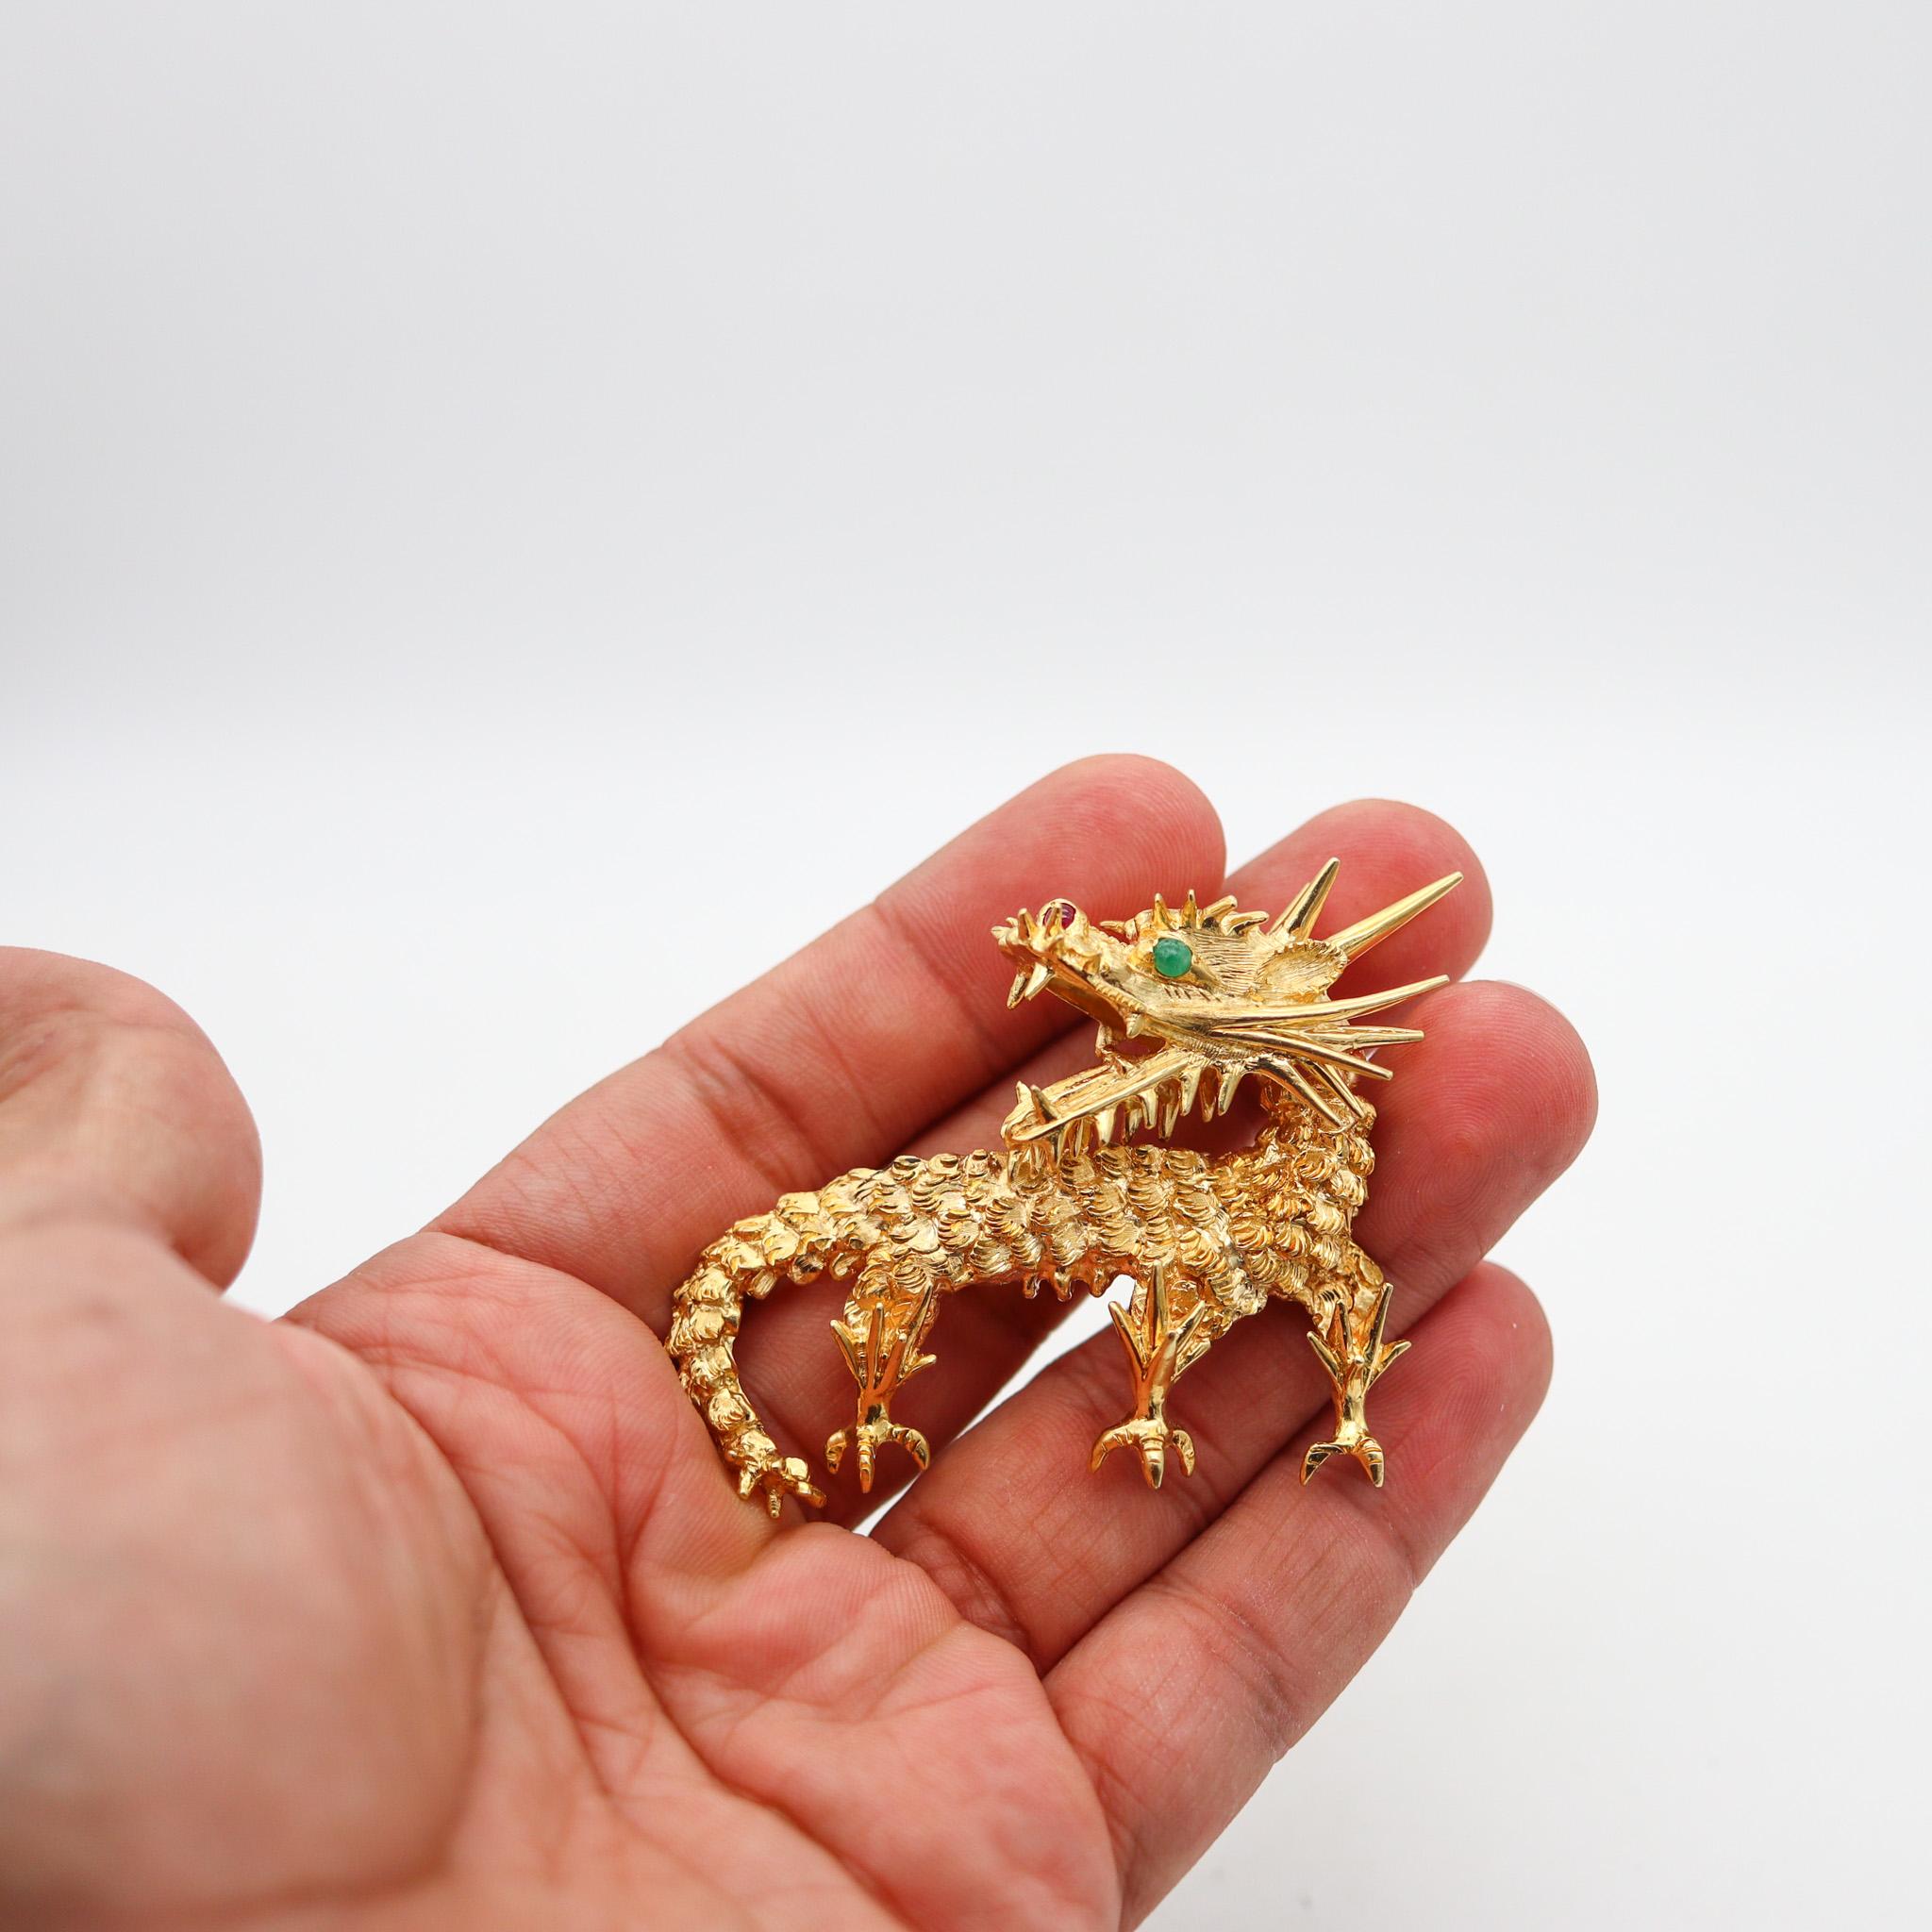 Cartier 1970 Sculpted Dragon Brooch In 18Kt Yellow Gold With Rubies And Emerald In Excellent Condition For Sale In Miami, FL